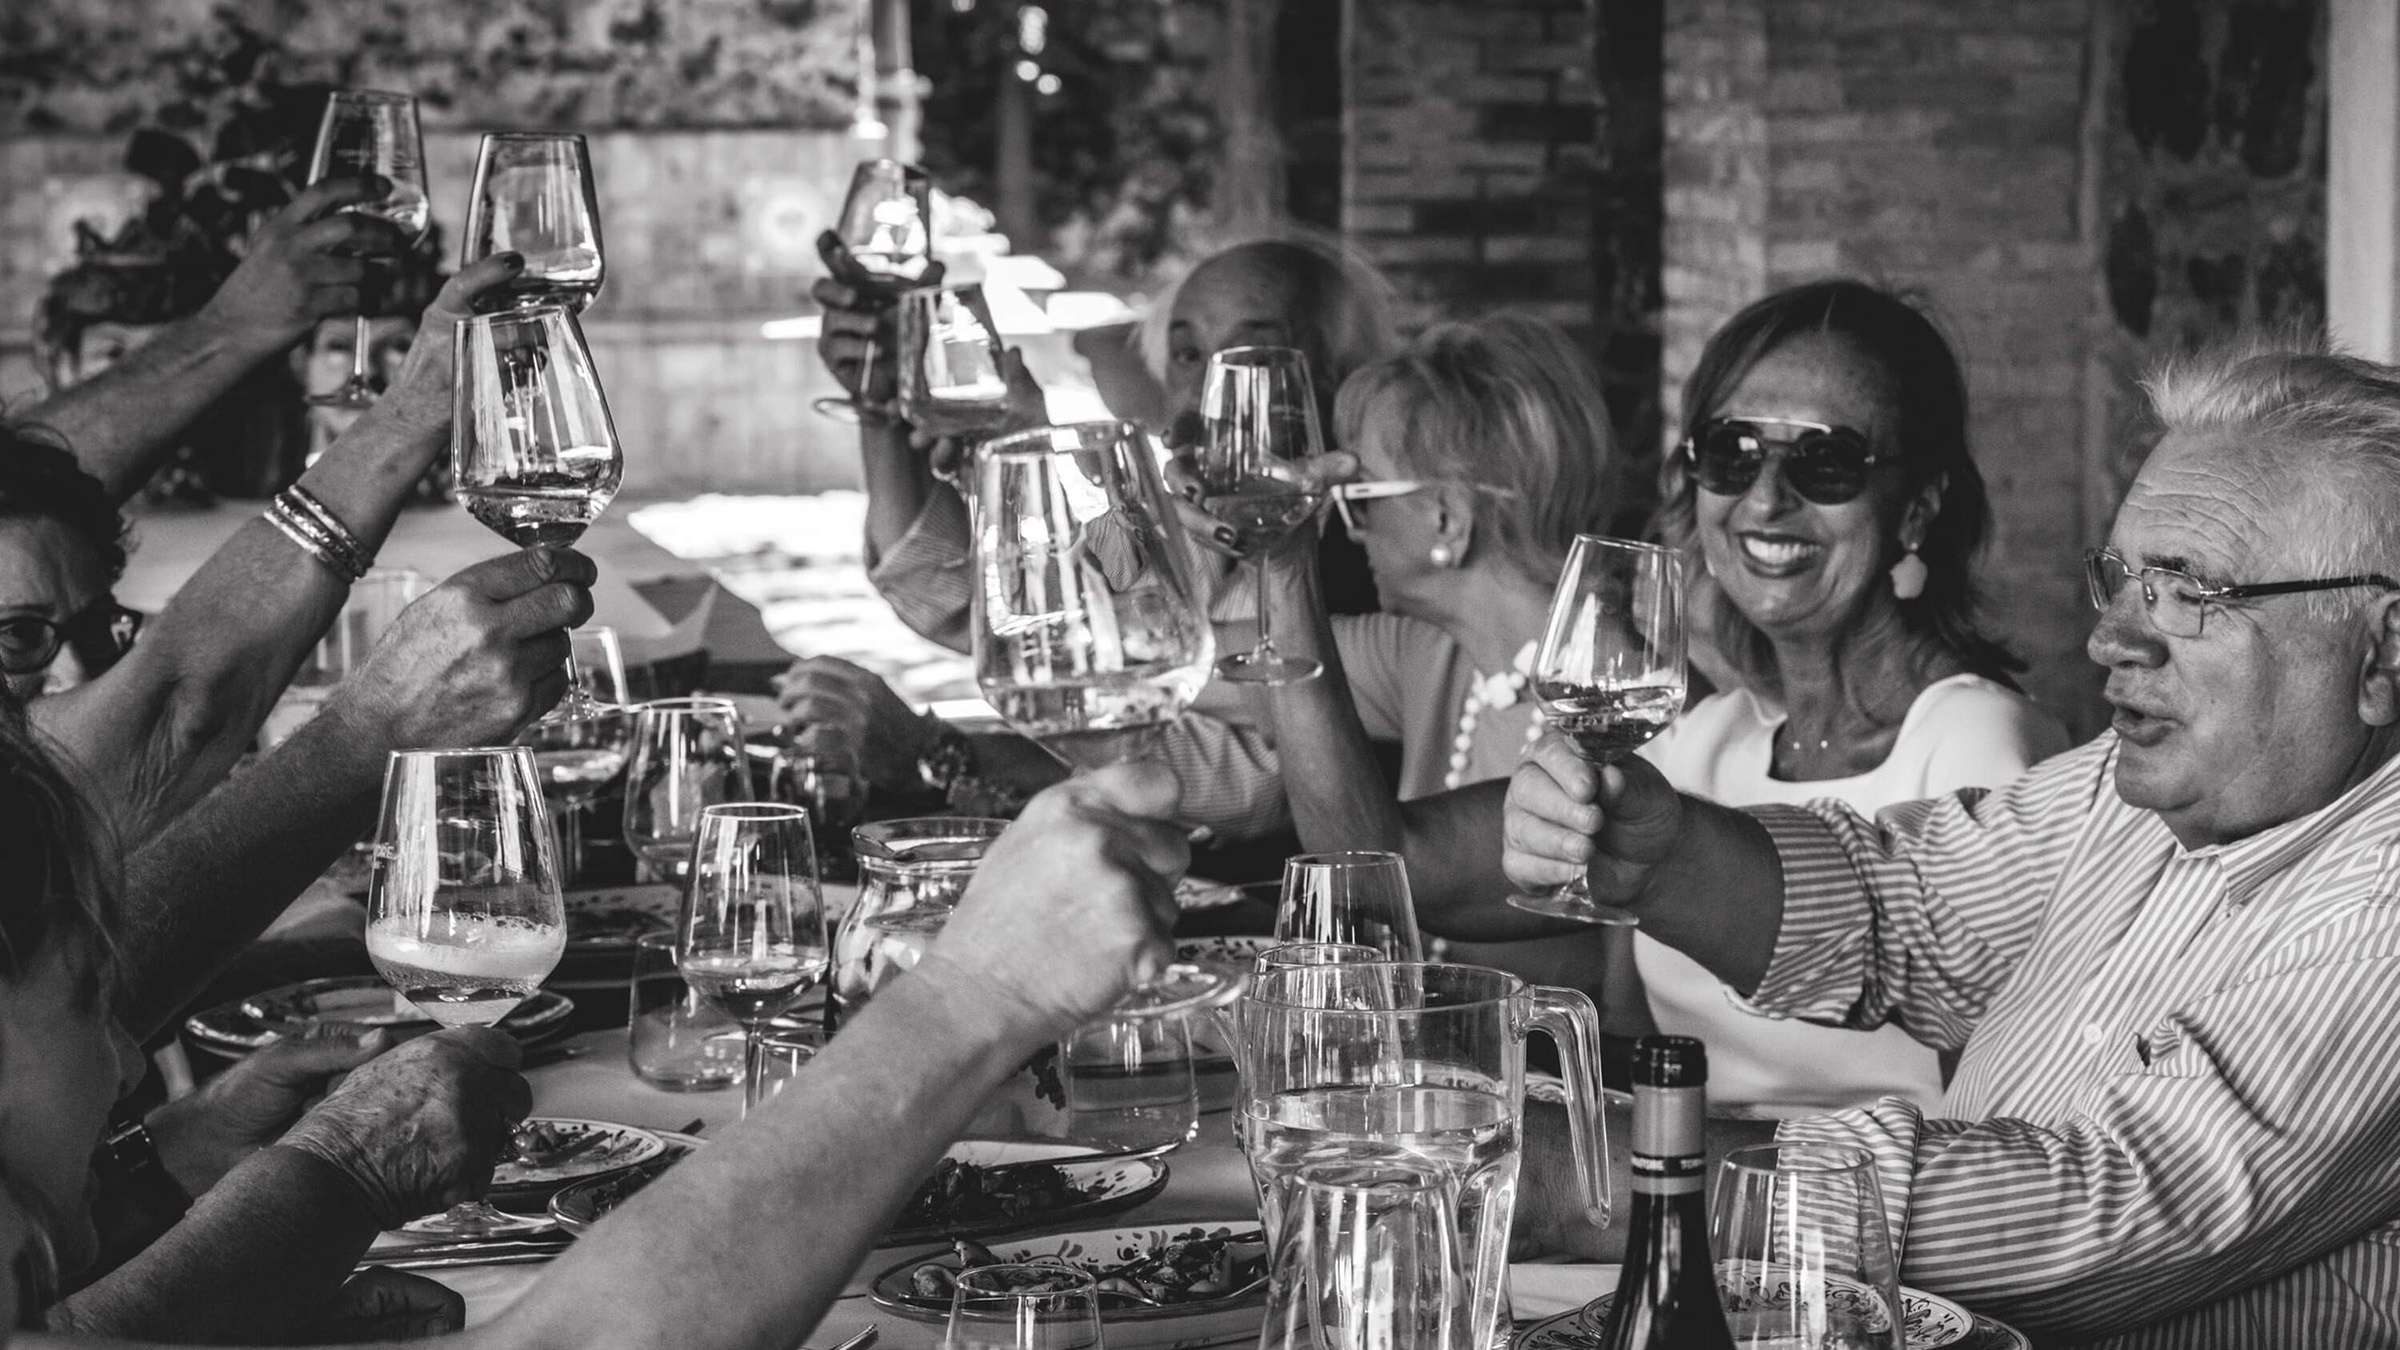 A group of people gathered around a dining table with wine glasses raised to toast.